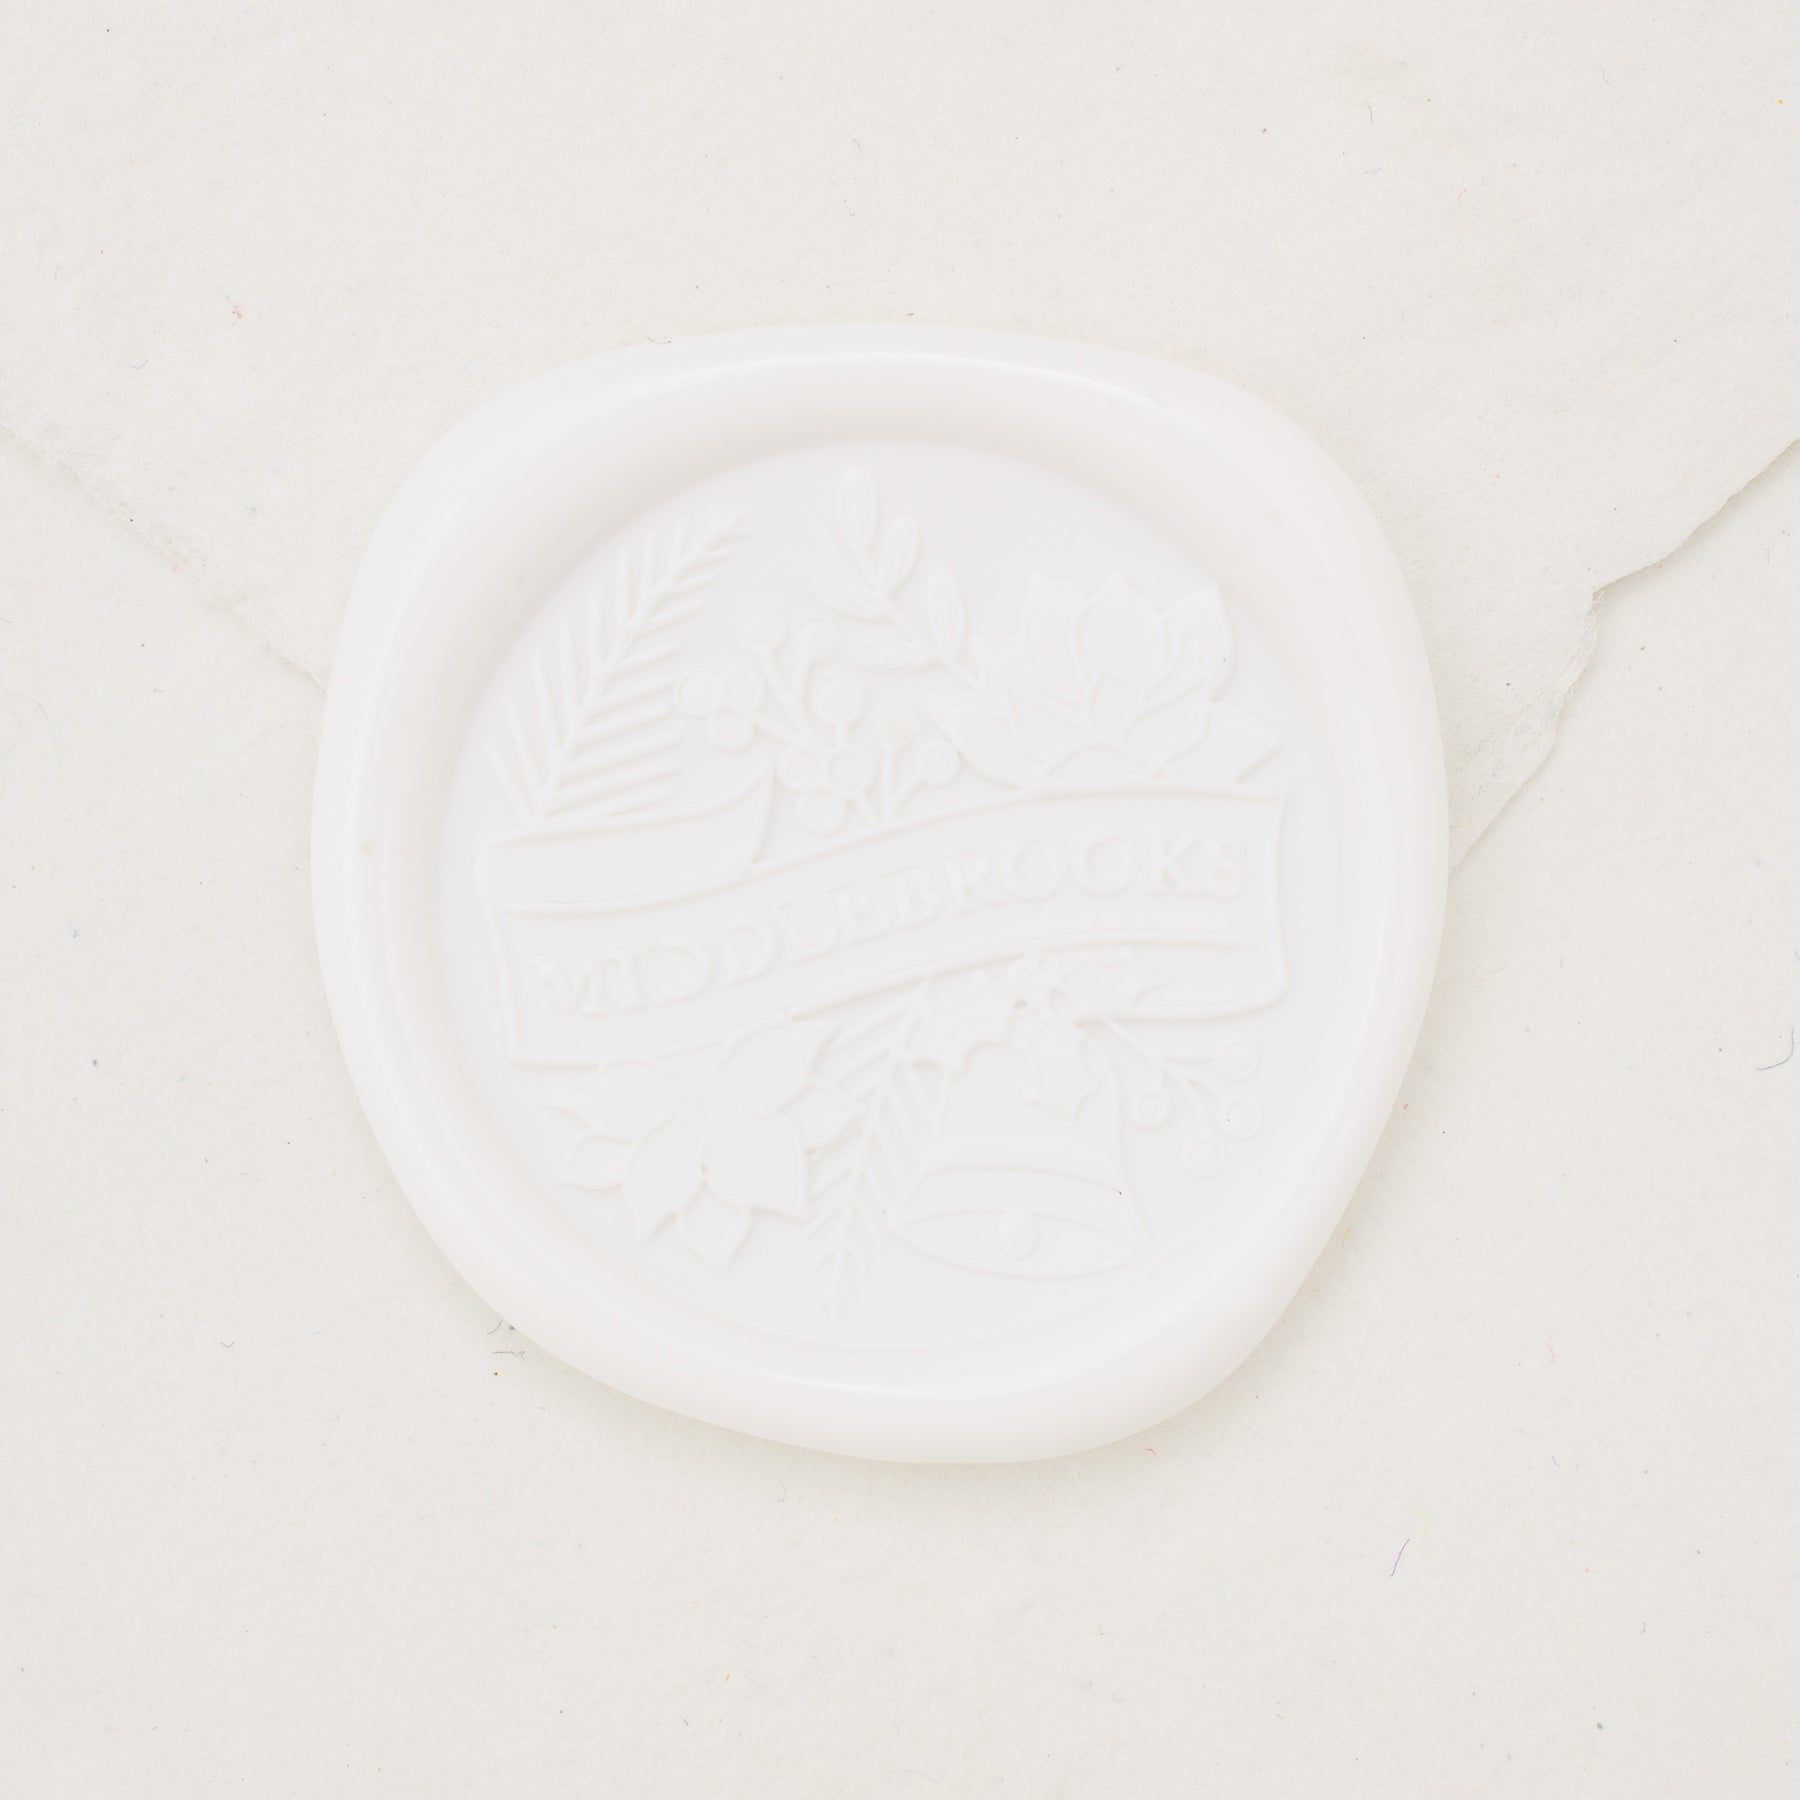 Cascabel Personalized Wax Seals